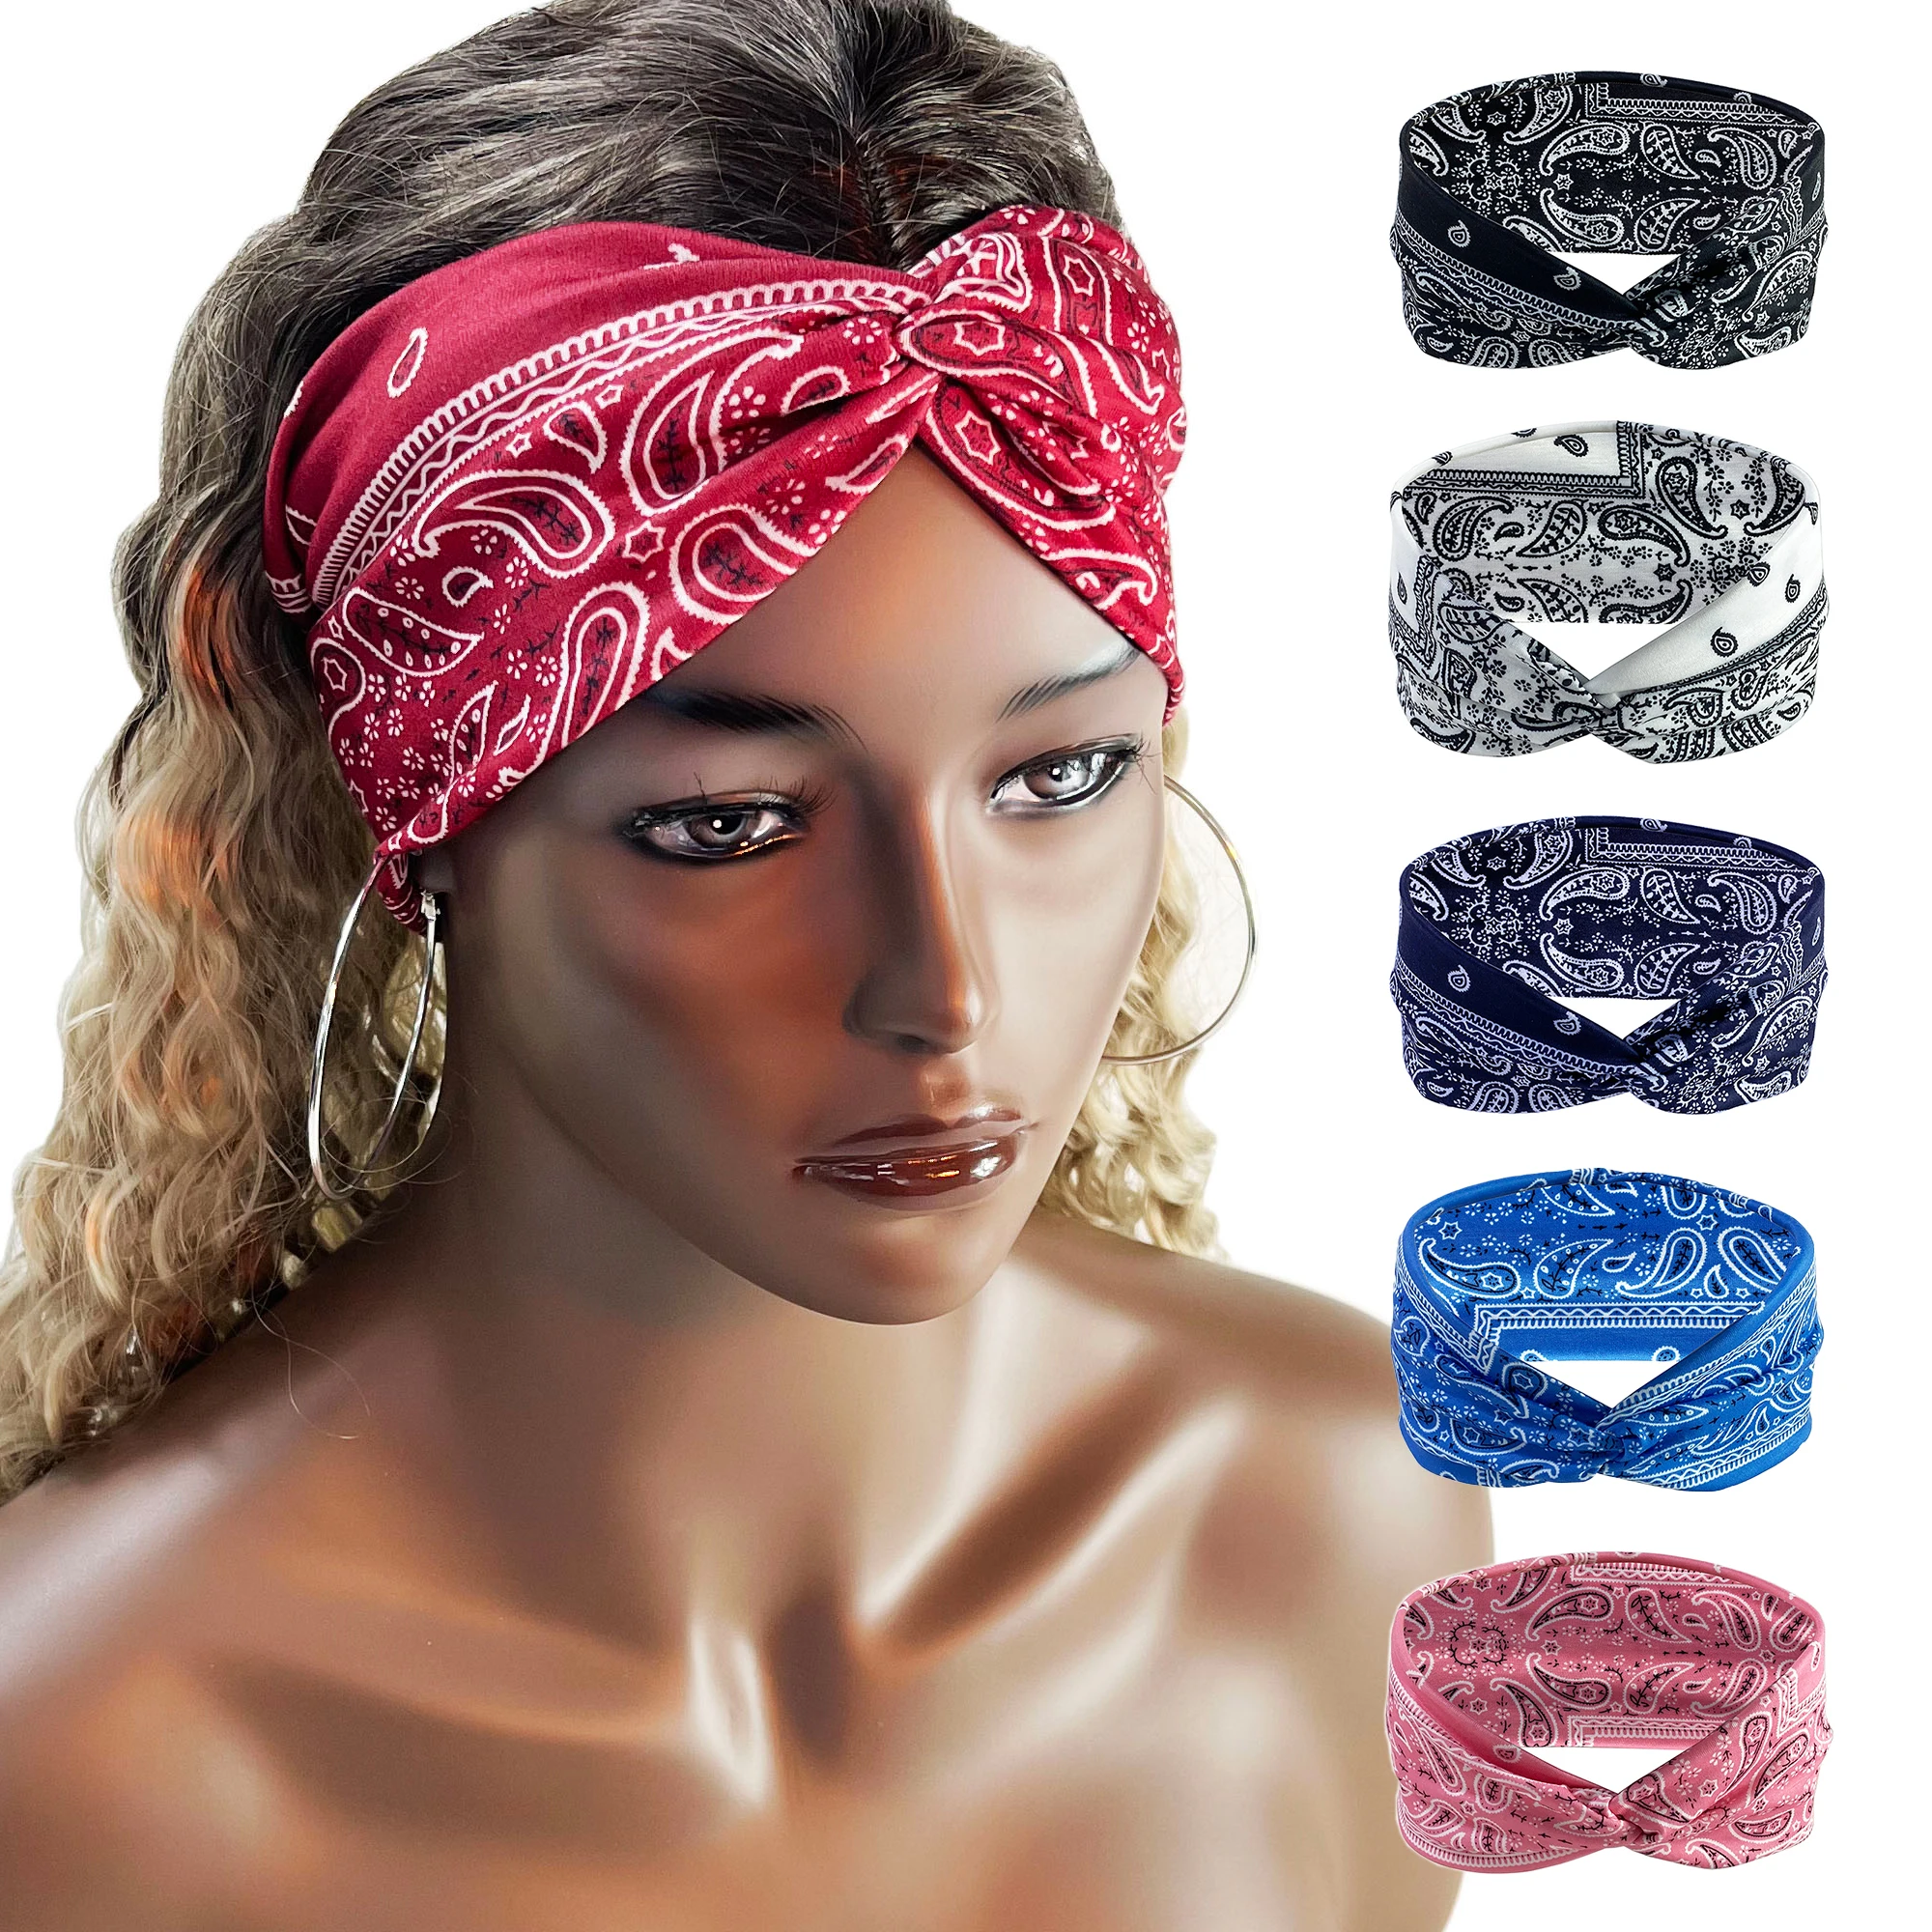 Head Bands Cross Elasticity Hair Band Bandana Print Head Wrap Beauty Sports Headband factory wholesale high quality pe many colors sports training disc cone with cross pattern on the top football agility cones